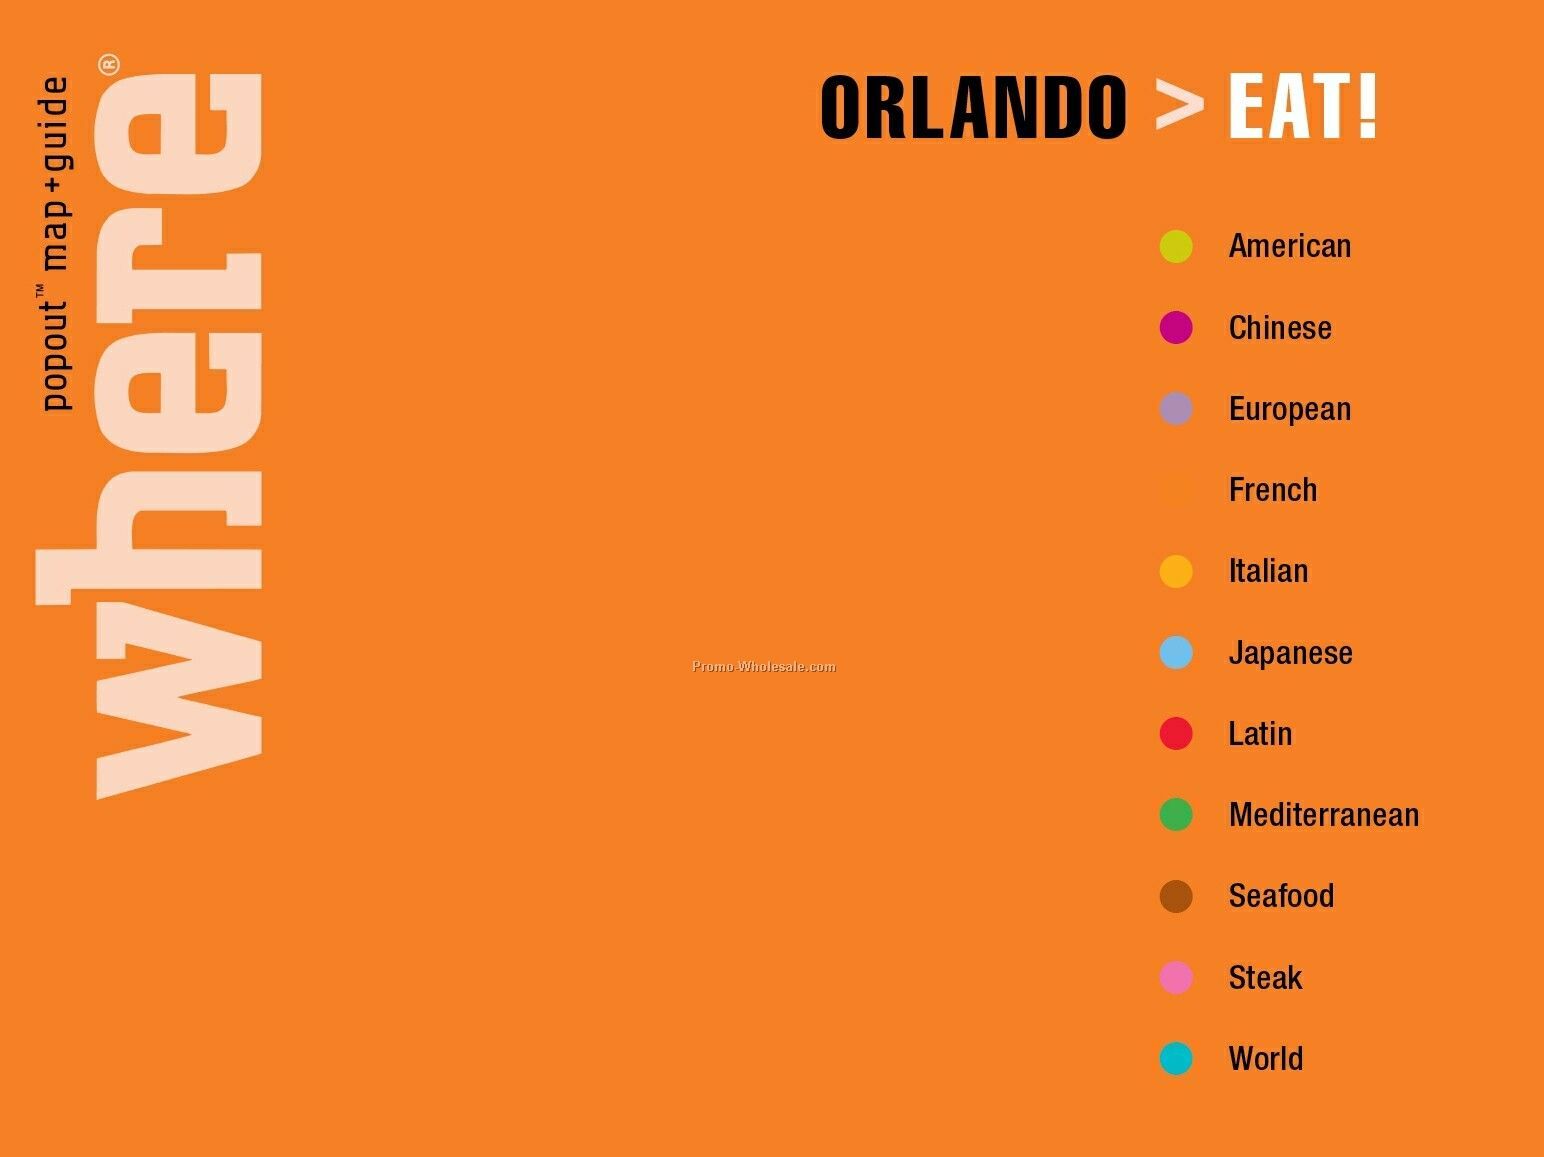 Restaurant Guides - Featuring Popout Maps - Eat! Orlando